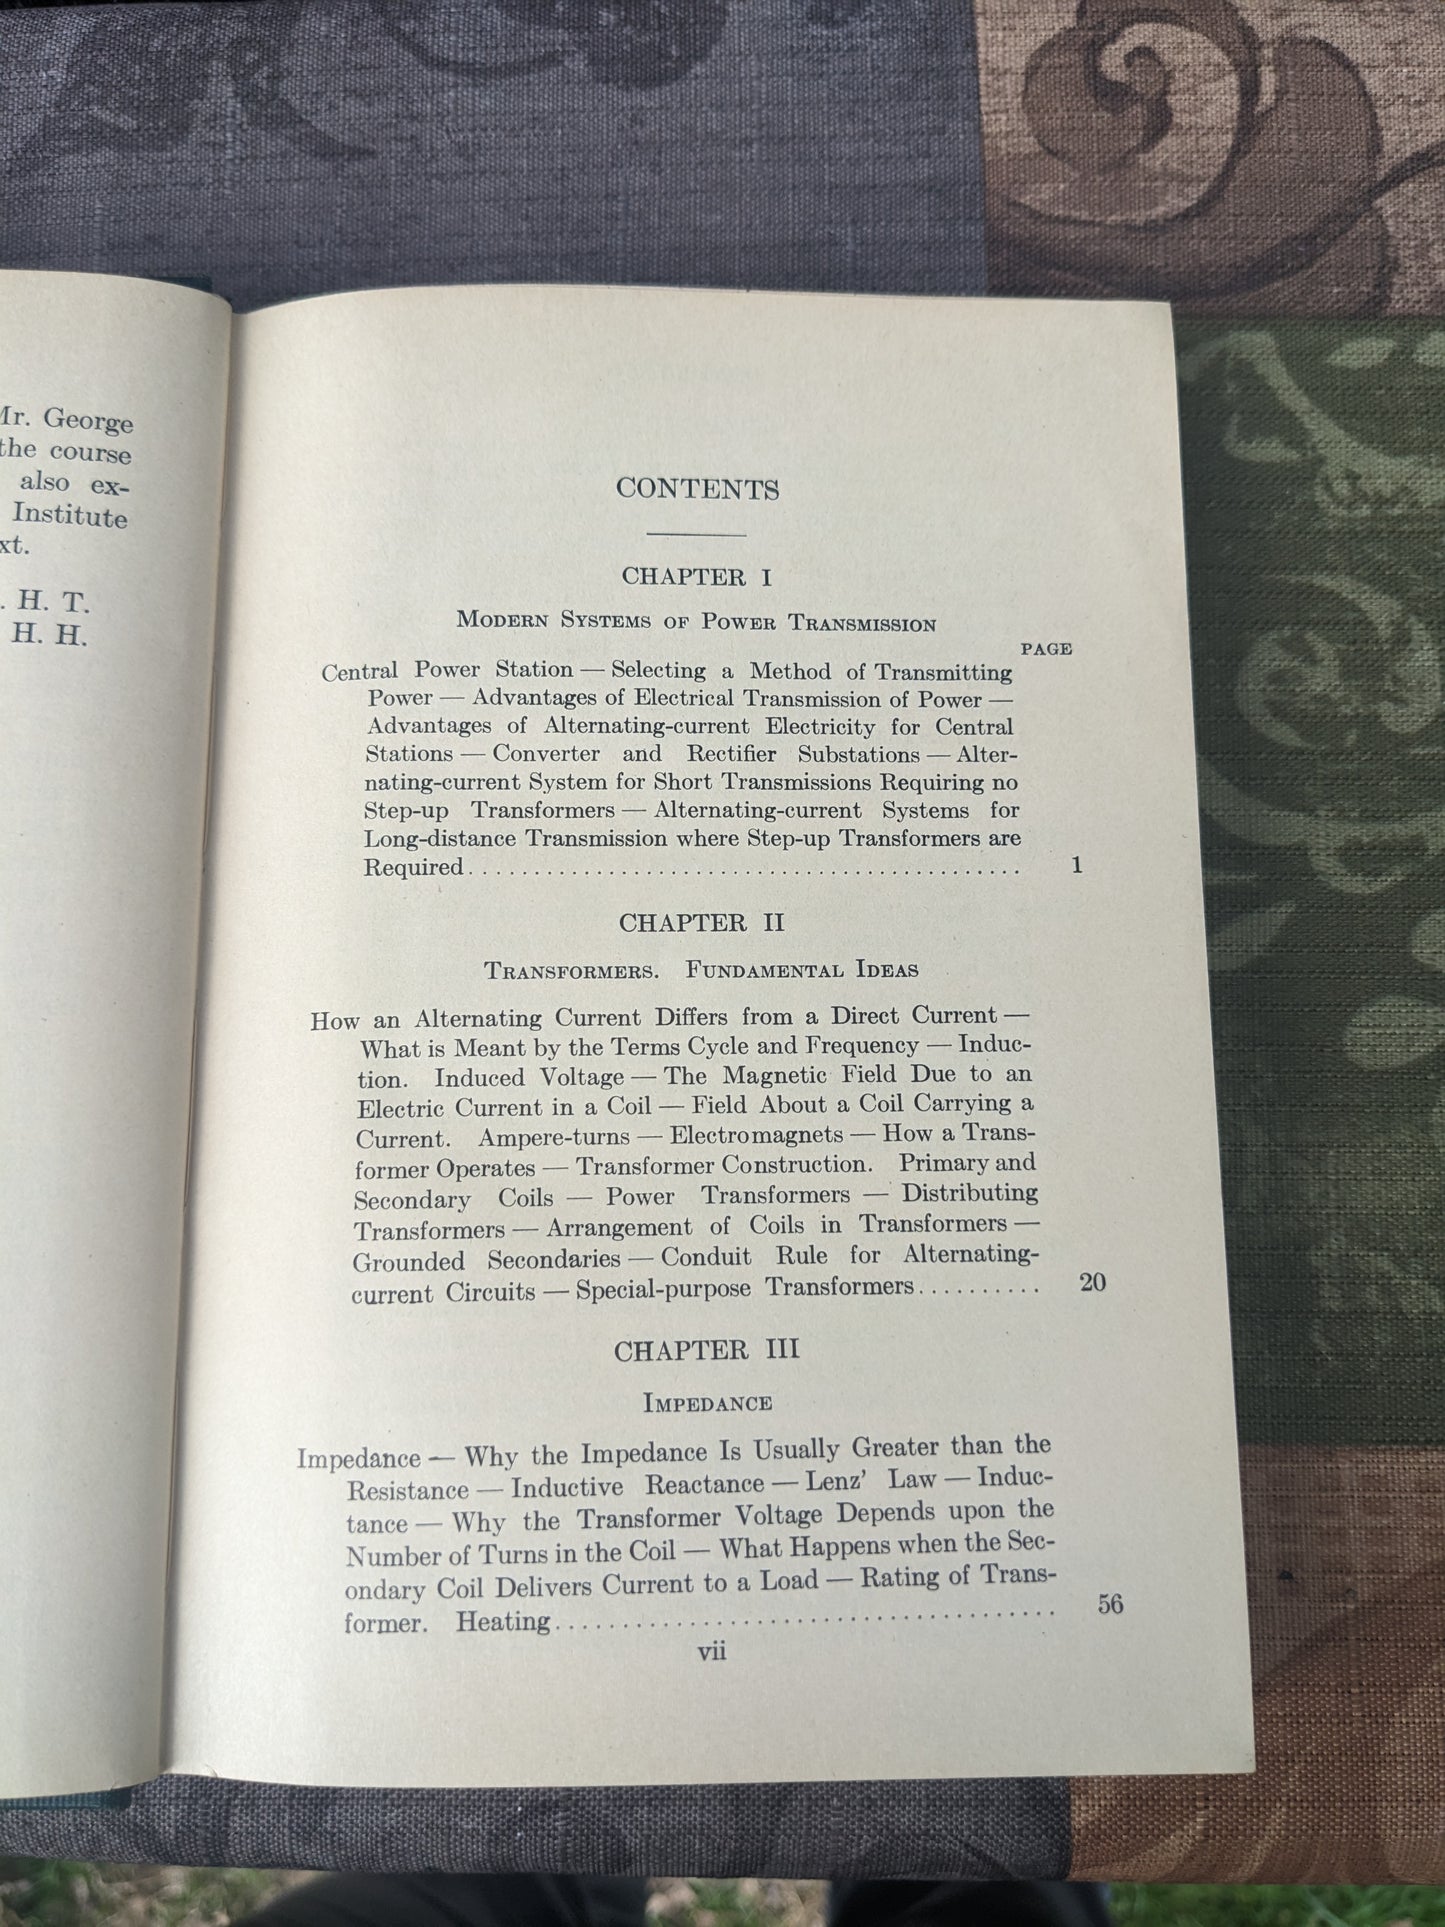 Essentials of Alternating Currents, 1939 Textbook by Timbie & Higbie